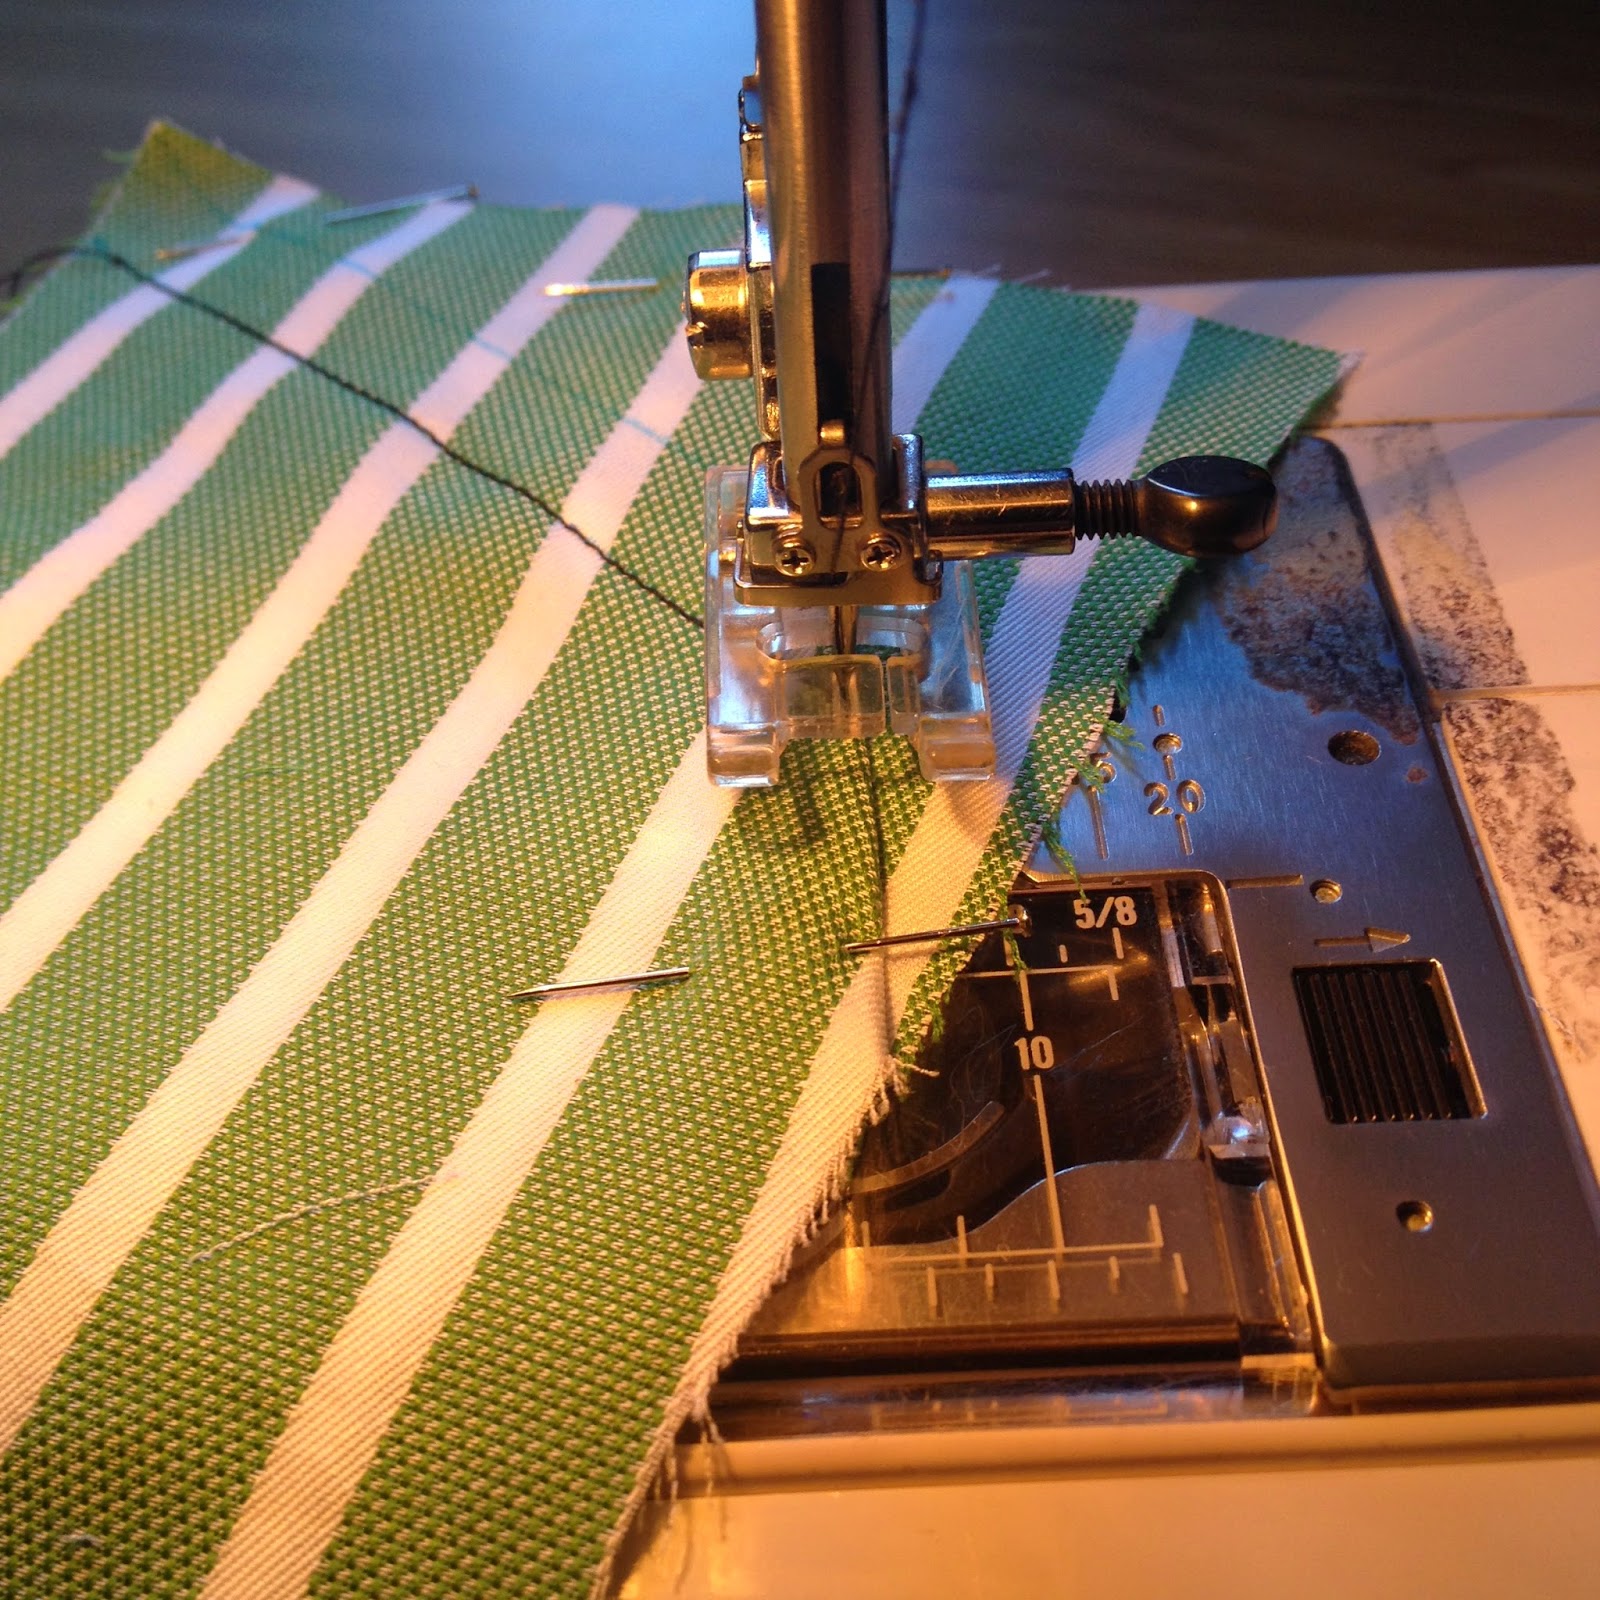 Diary of a Chain Stitcher: How To Add Collar Stay Slots to a Handmade Shirt